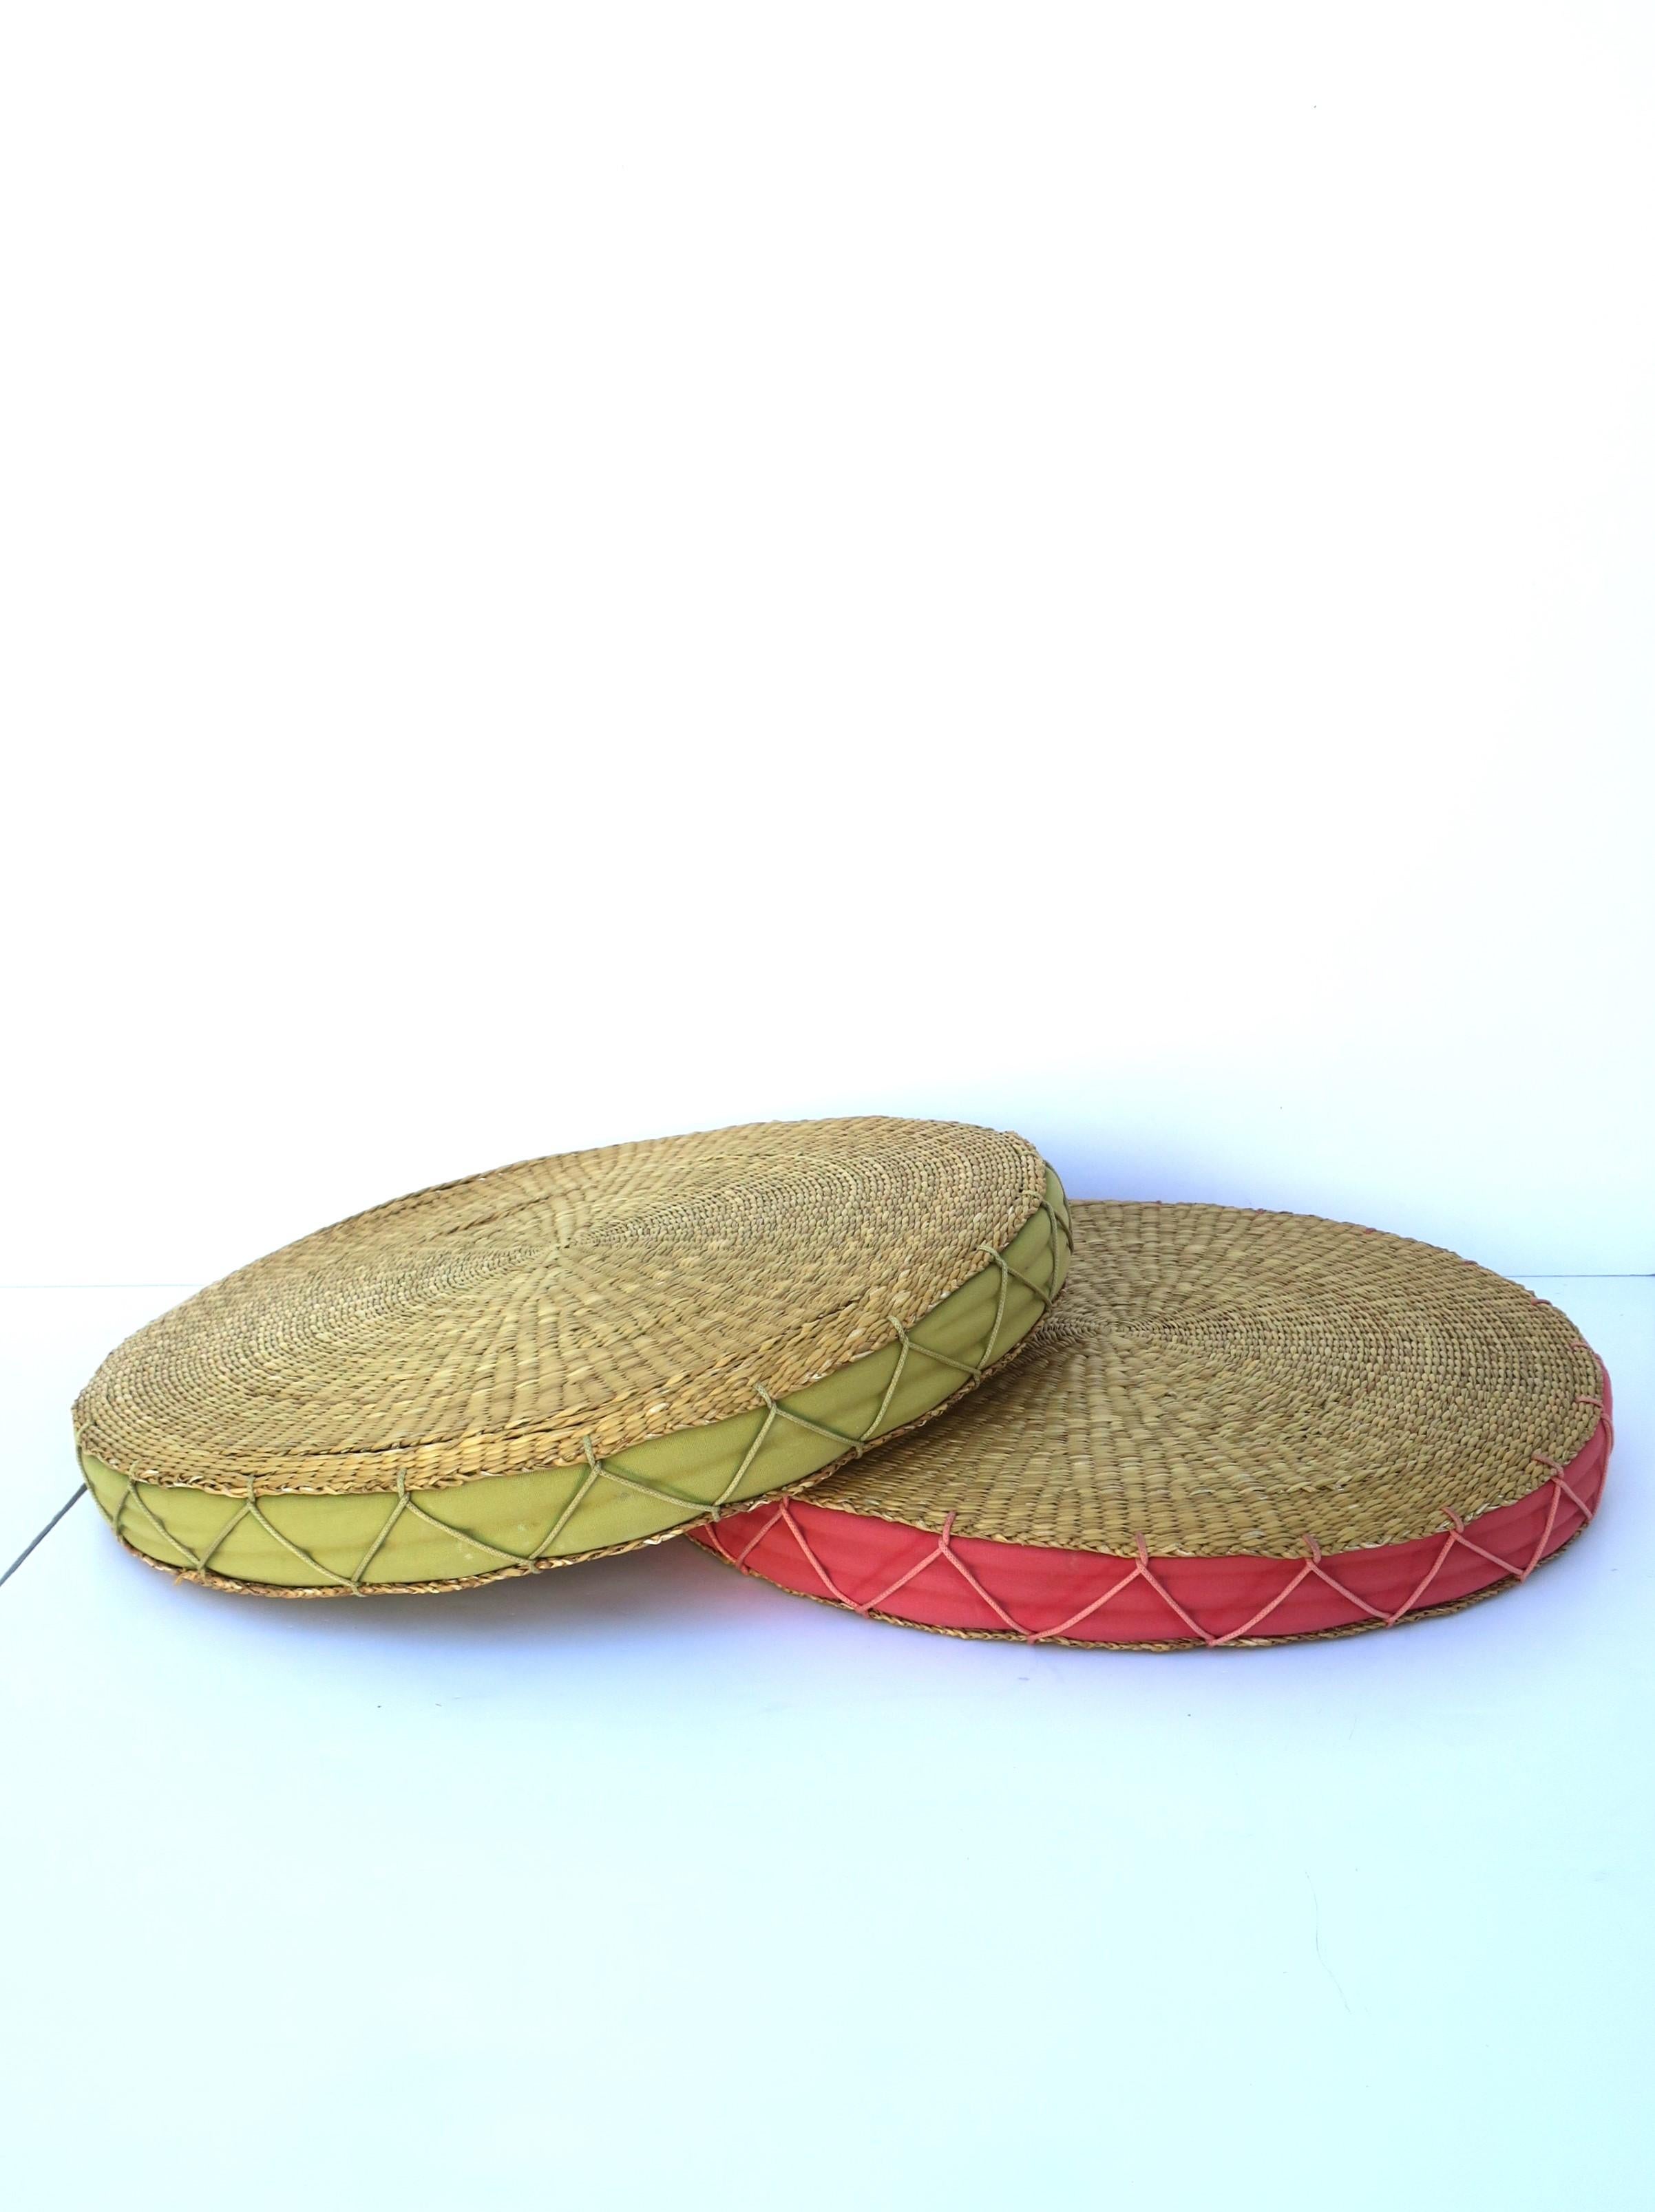 20th Century Wicker Seat or Floor Cushion, Watermelon Pink and Tan For Sale